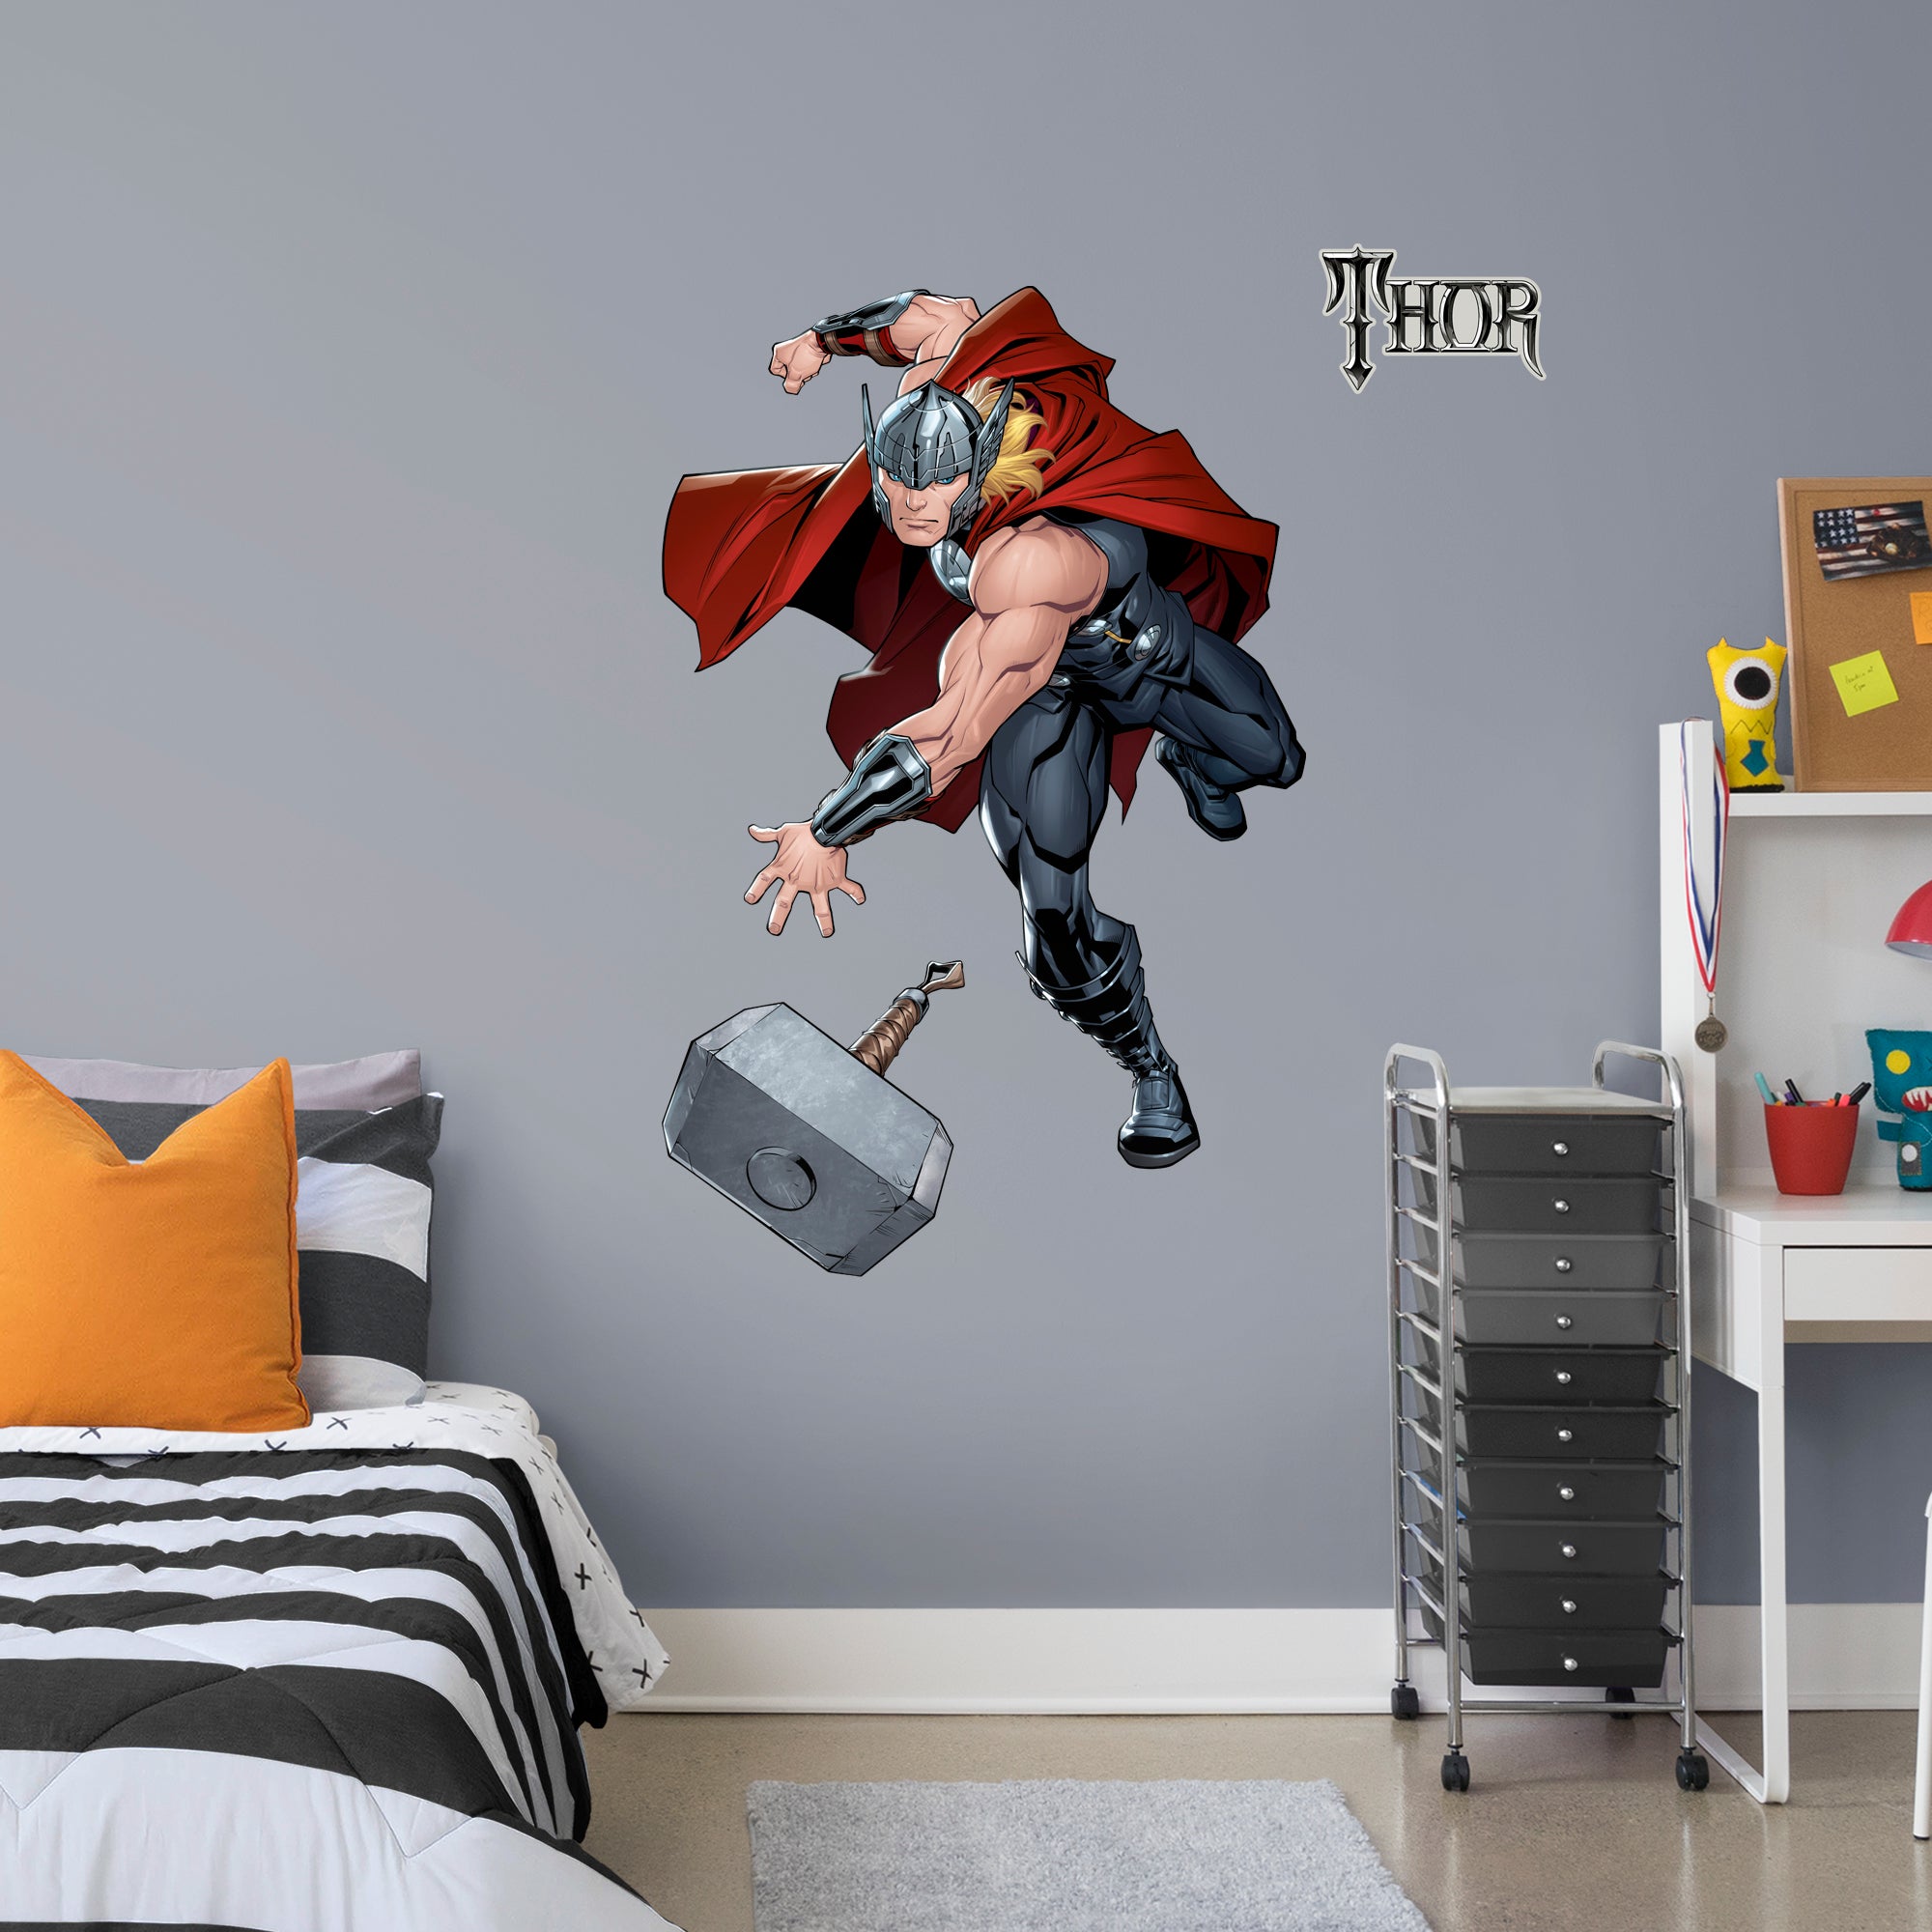 Thor: Avengers Core - Officially Licensed Removable Wall Decal Giant Character + 2 Decals (33"W x 51"H) by Fathead | Vinyl